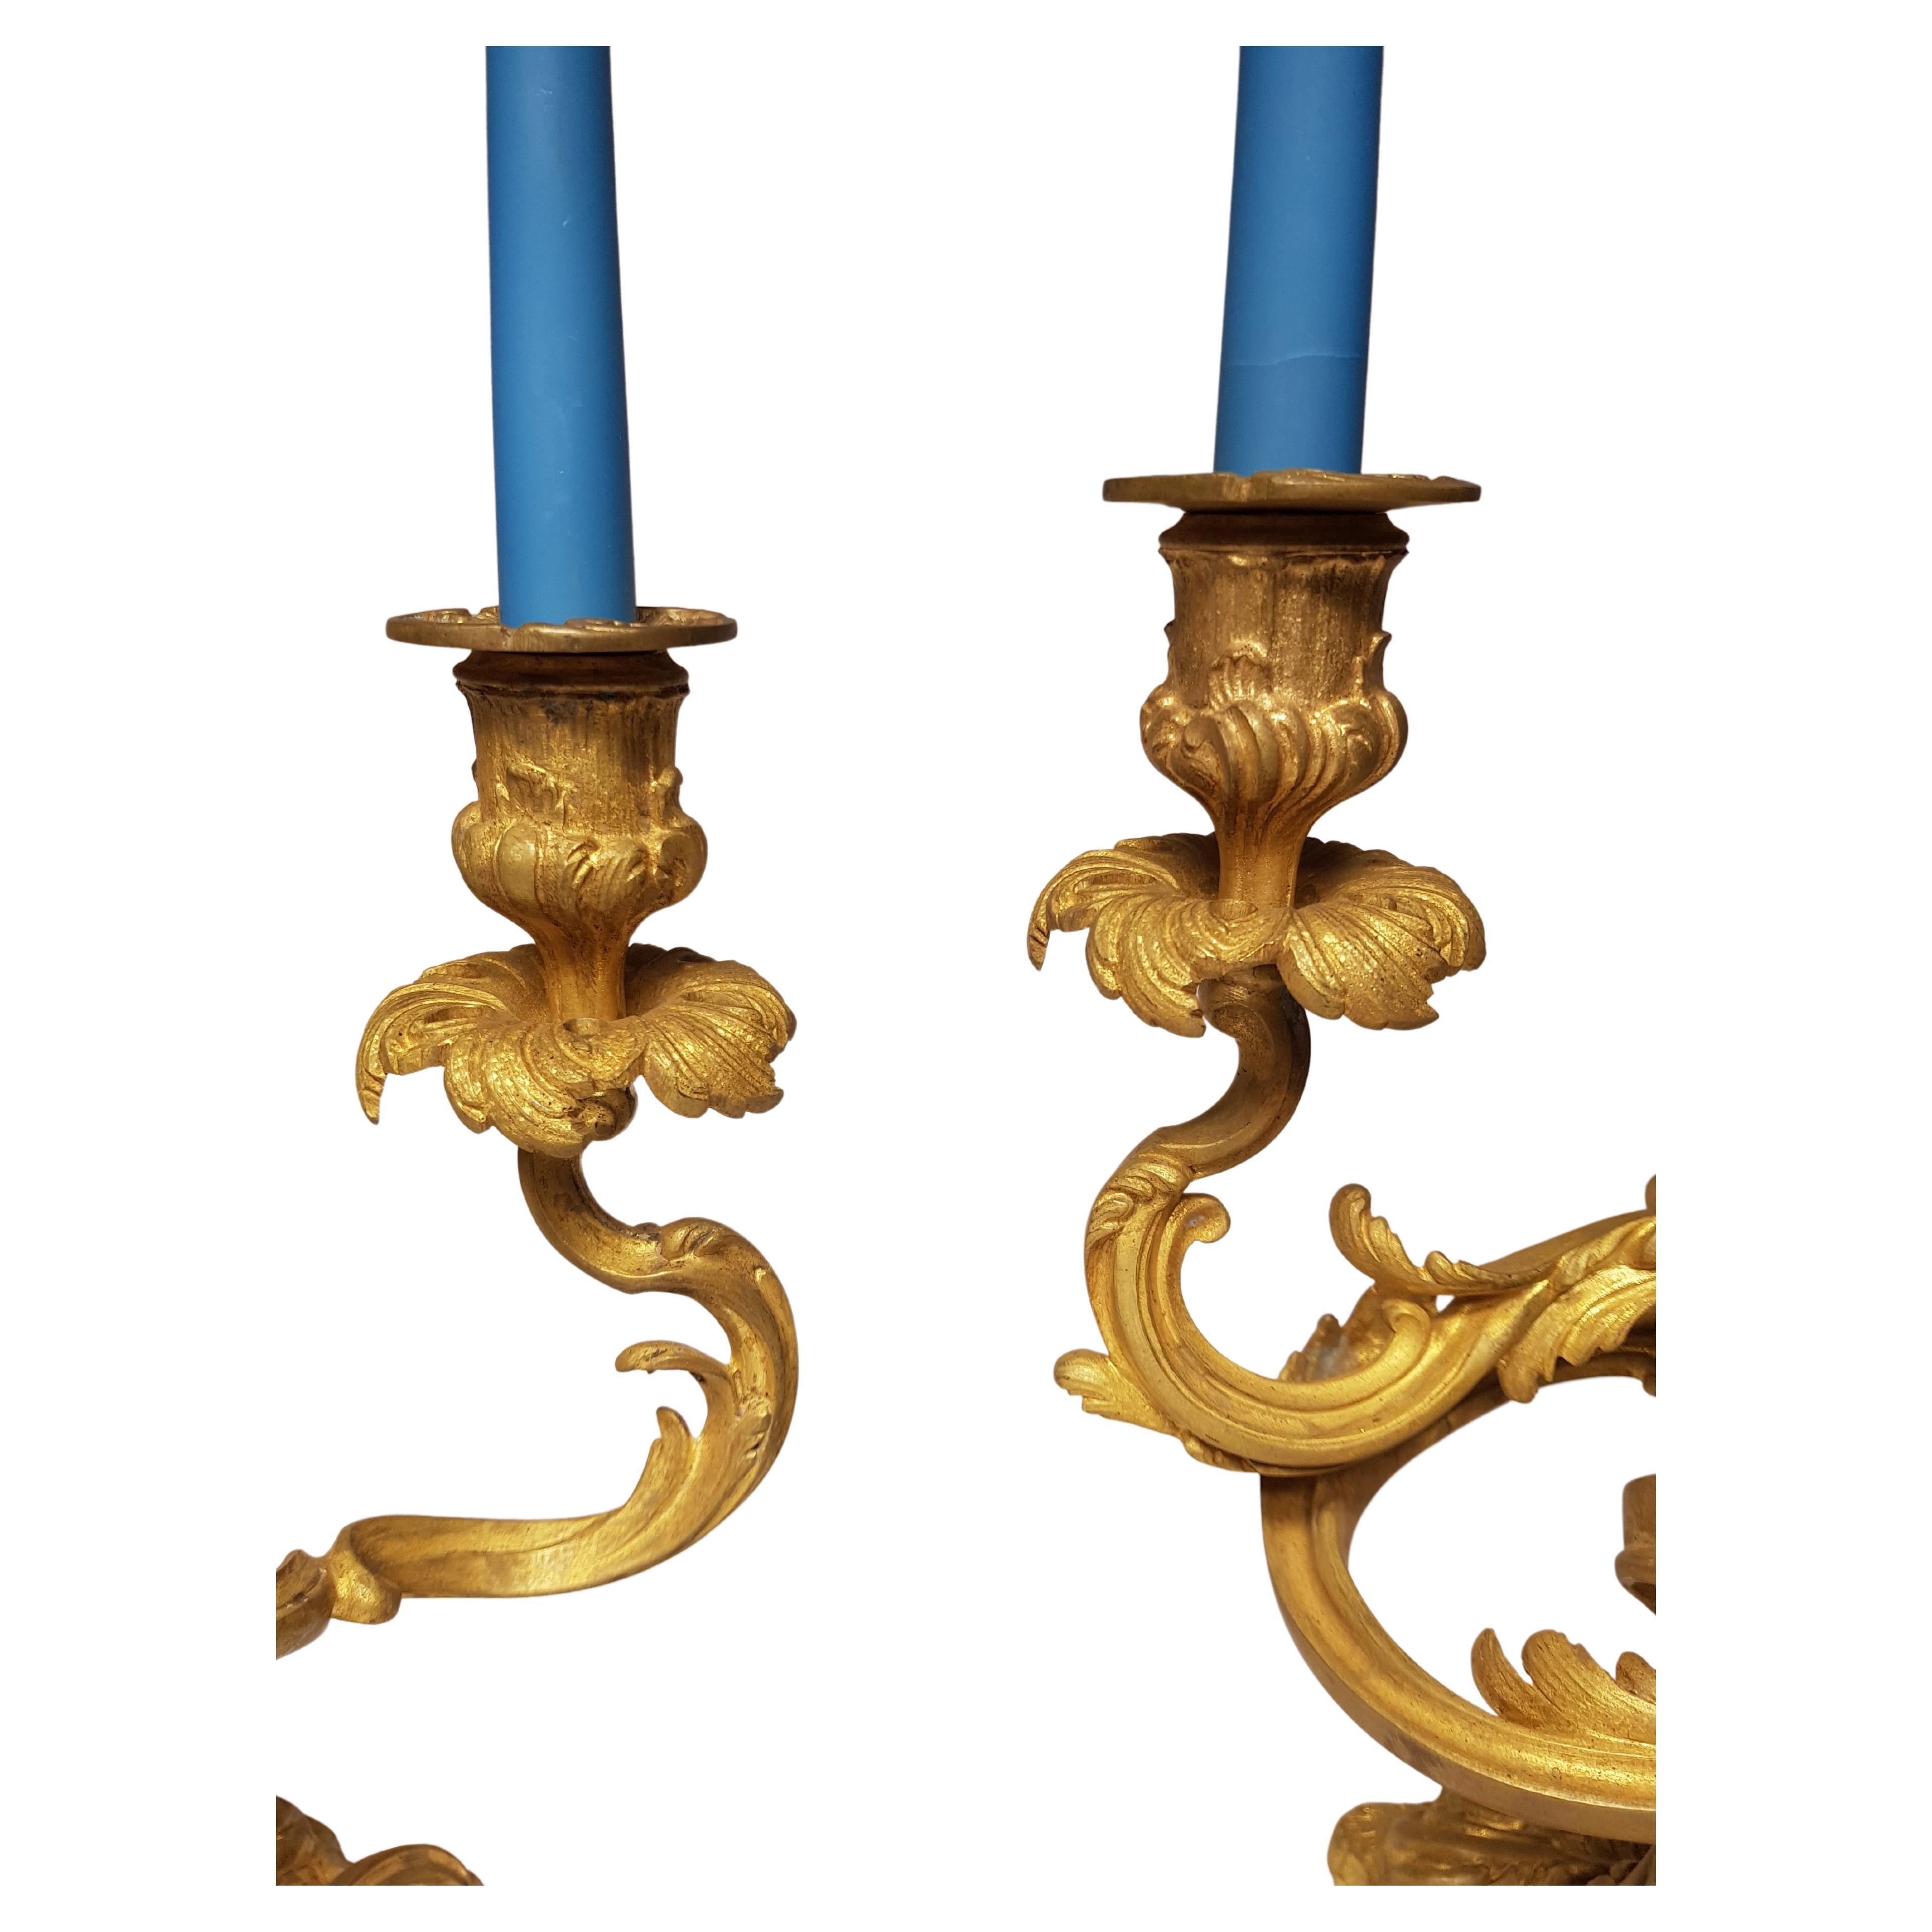 Immerse yourself in the majestic world of antiques with these beautiful 3-arm candle holders made of sturdy and exquisite brass. Each candle holder proudly rises to a height of 32 centimeters, radiating an aura of elegance and grandeur.

The warm,